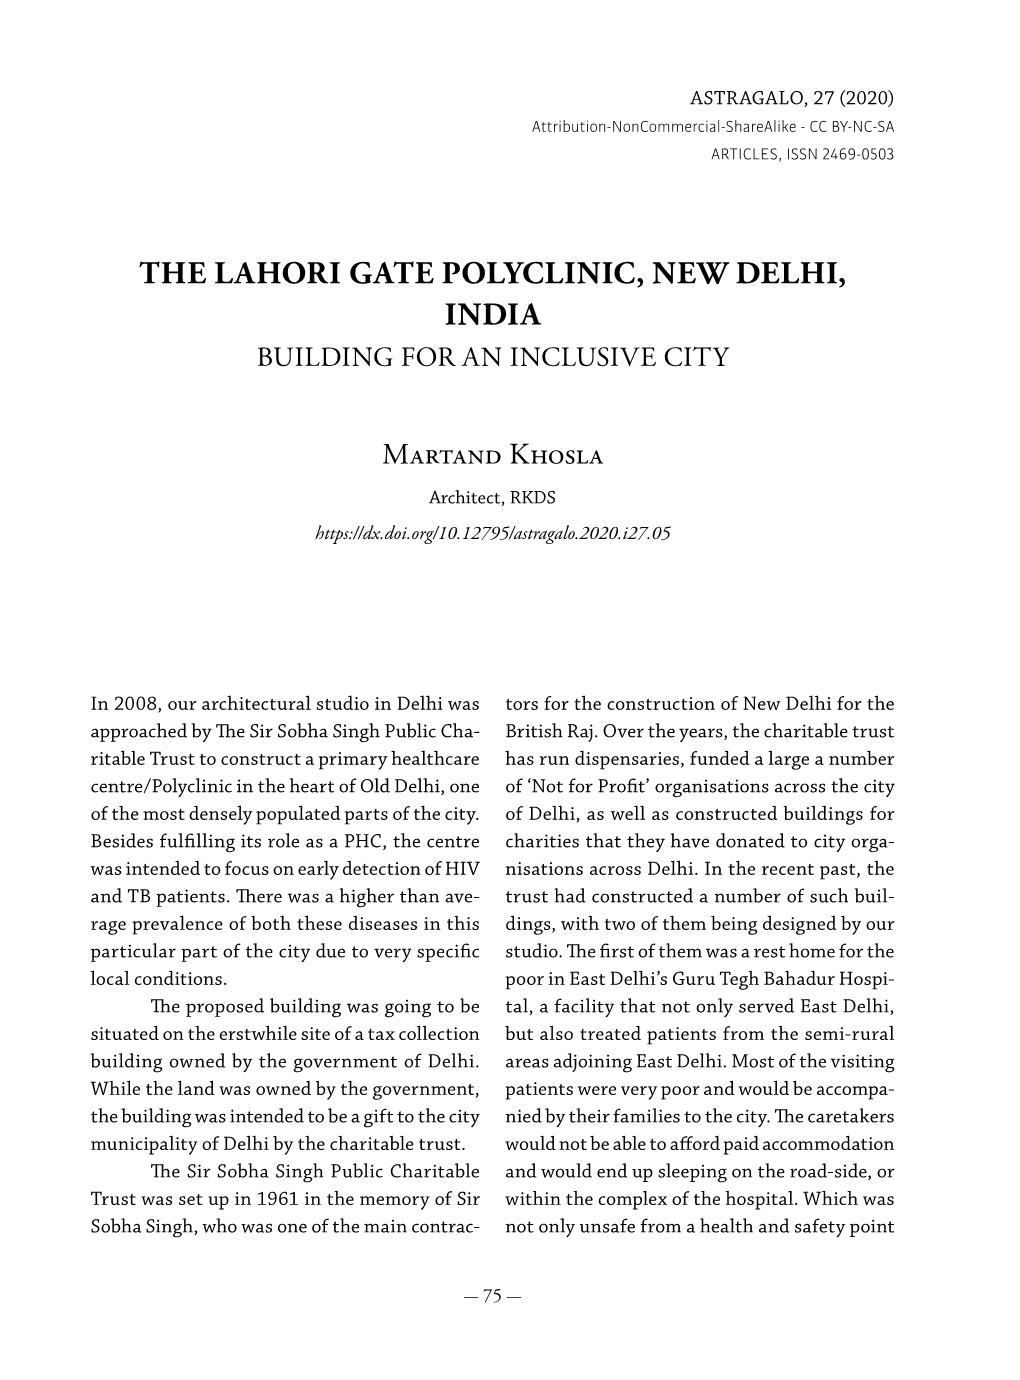 The Lahori Gate Polyclinic, New Delhi, India Building for an Inclusive City